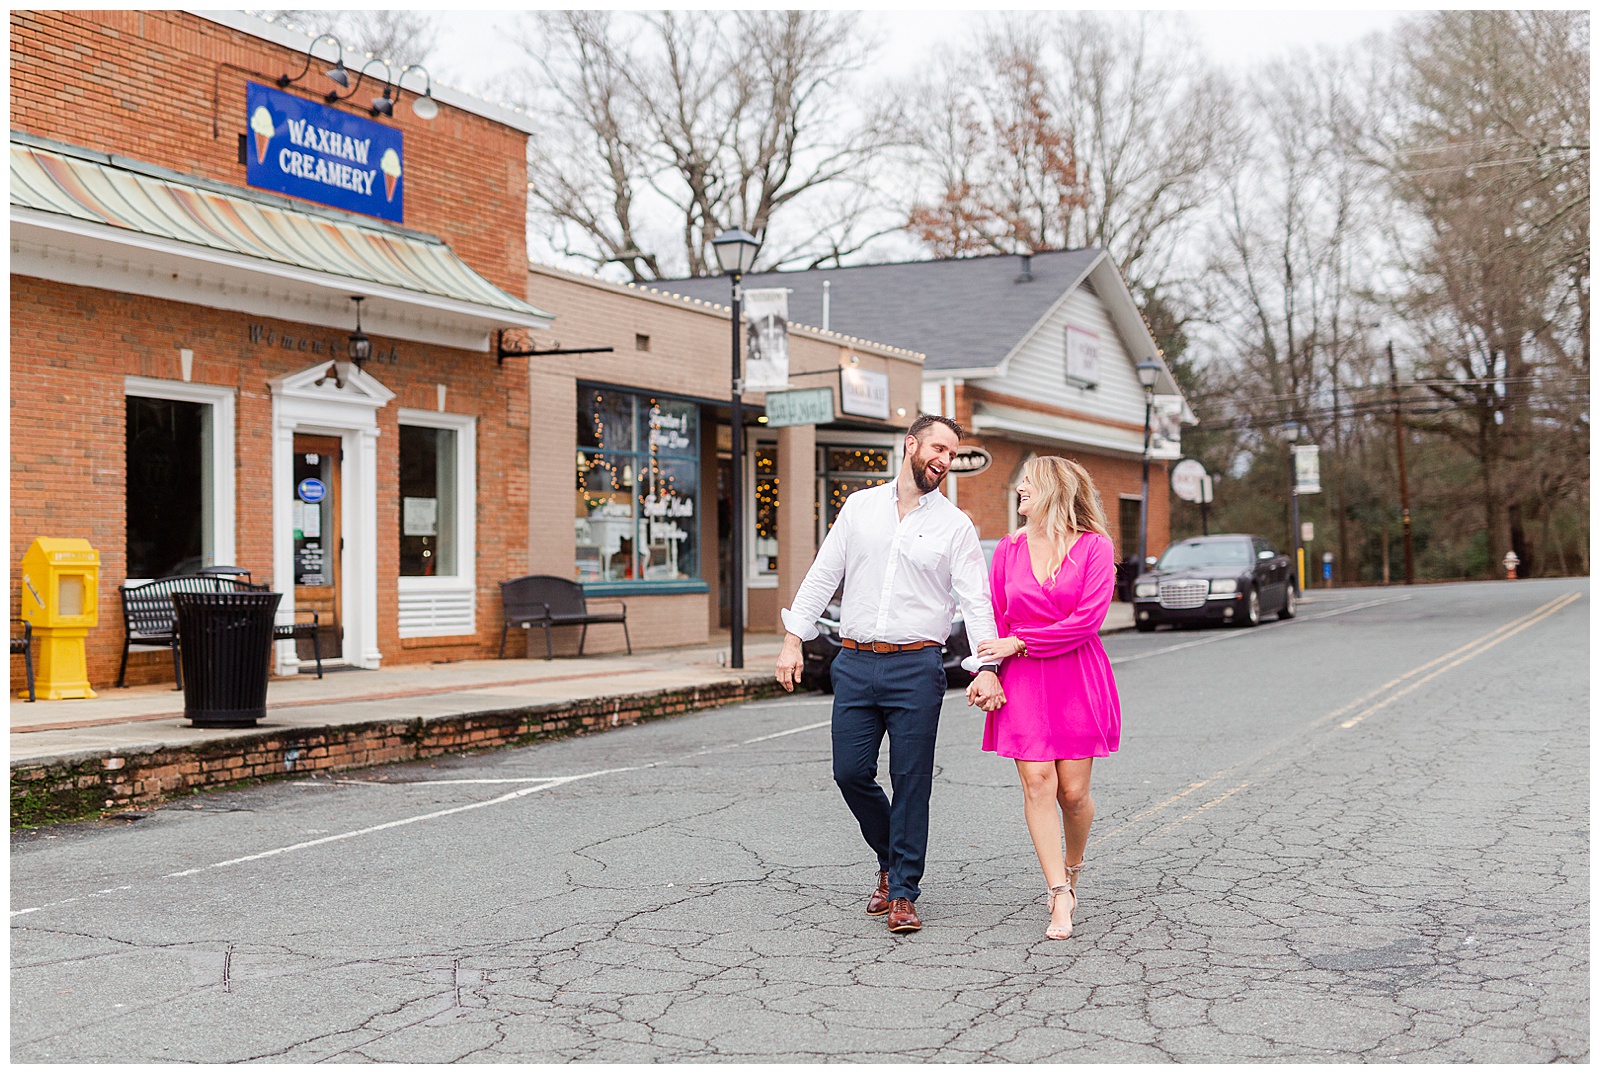 Adorable couple walking down main street in downtown Waxhaw, NC Engagement Session with Bright Hot Pink Dress Outfit Ideas